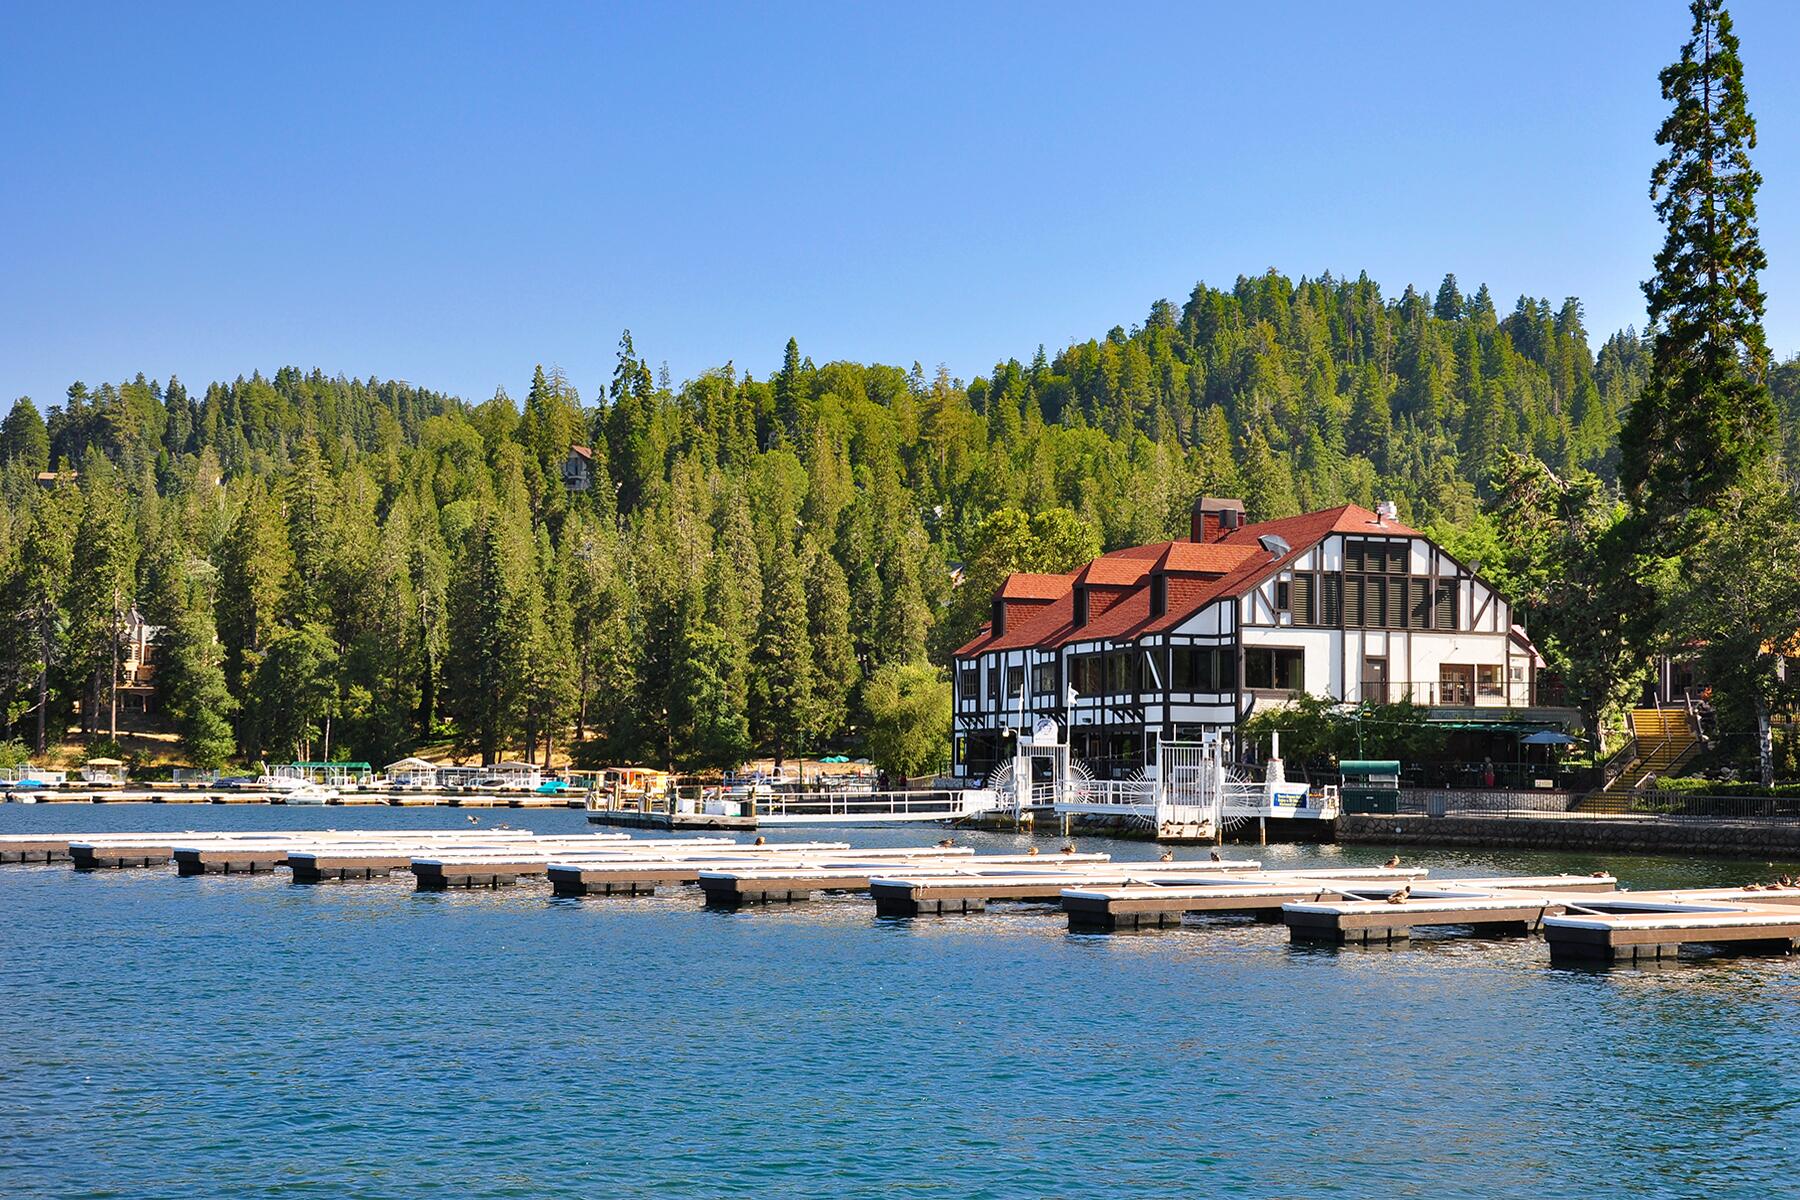 <a href='https://www.fodors.com/world/north-america/usa/california/experiences/news/photos/the-best-fall-day-trips-to-take-from-los-angeles#'>From &quot;12 Easy Fall Day Trips to Take From Los Angeles: Lake Arrowhead&quot;</a>